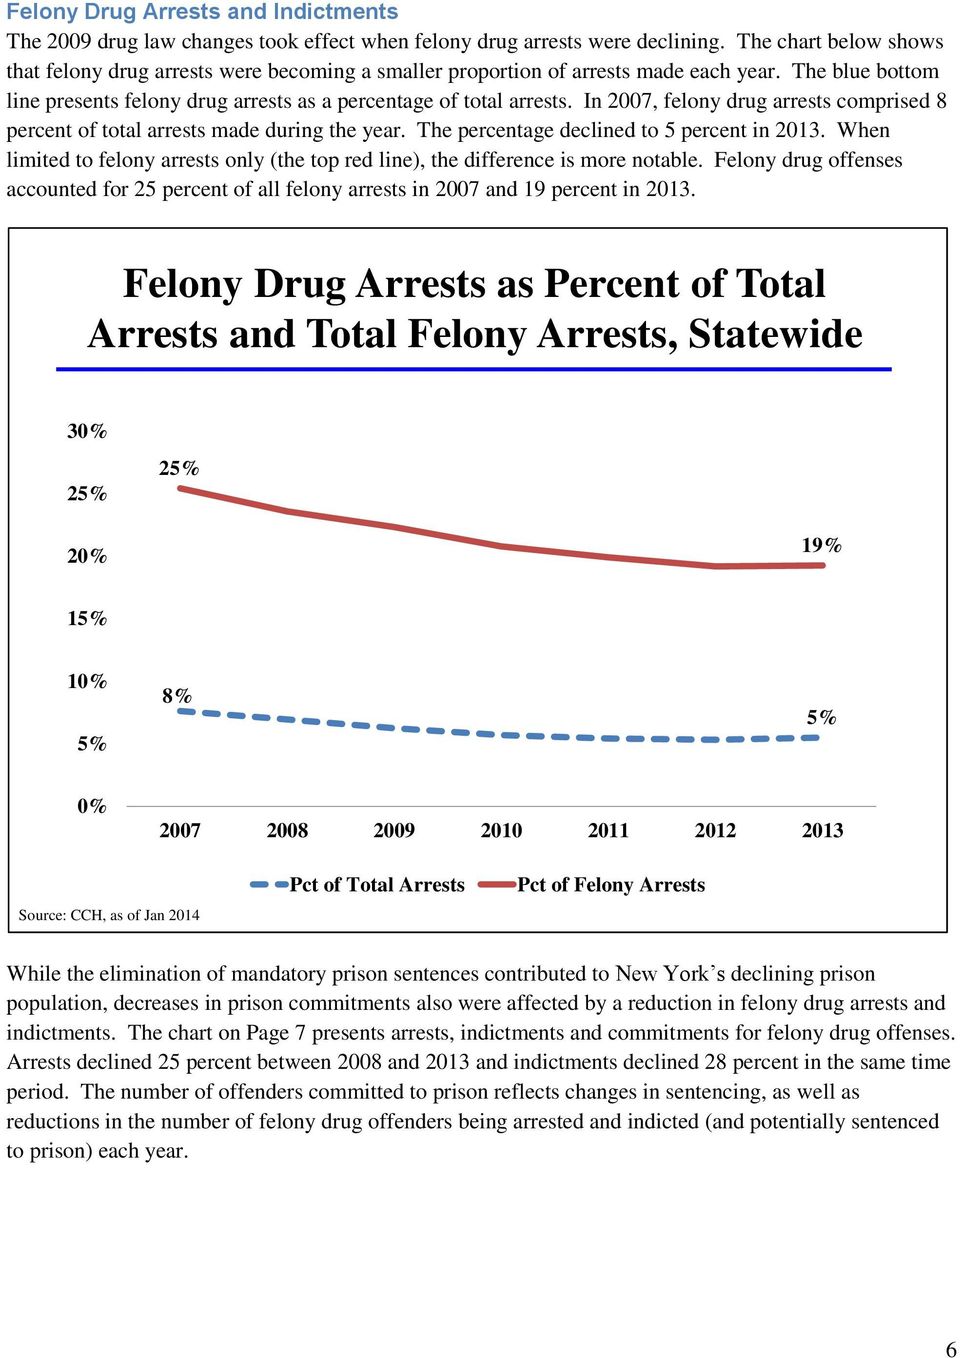 In 2007, felony drug arrests comprised 8 percent of total arrests made during the year. The percentage declined to 5 percent in 2013.